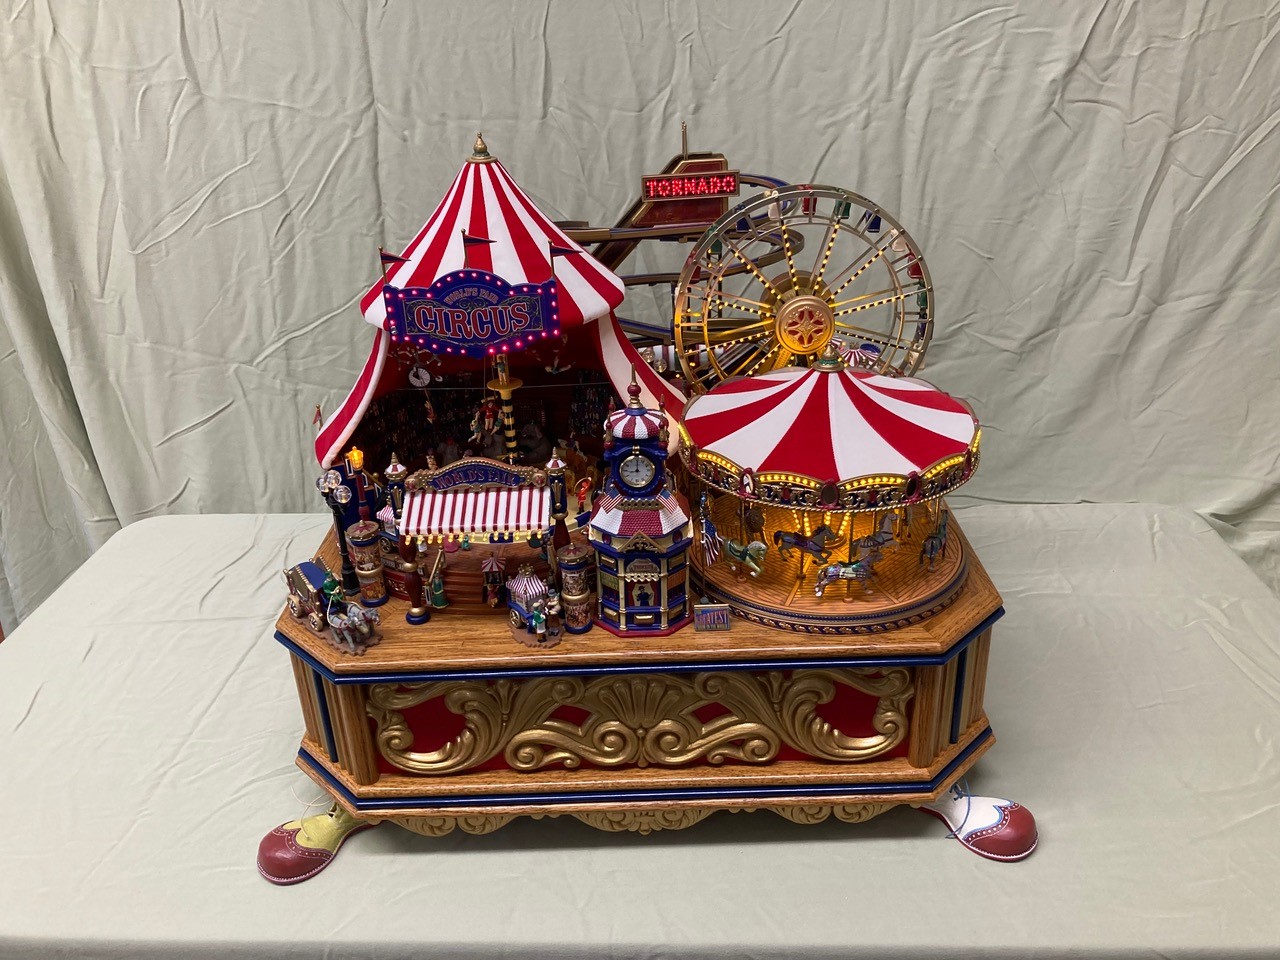 The "Circus" music box was finished in 2007. 